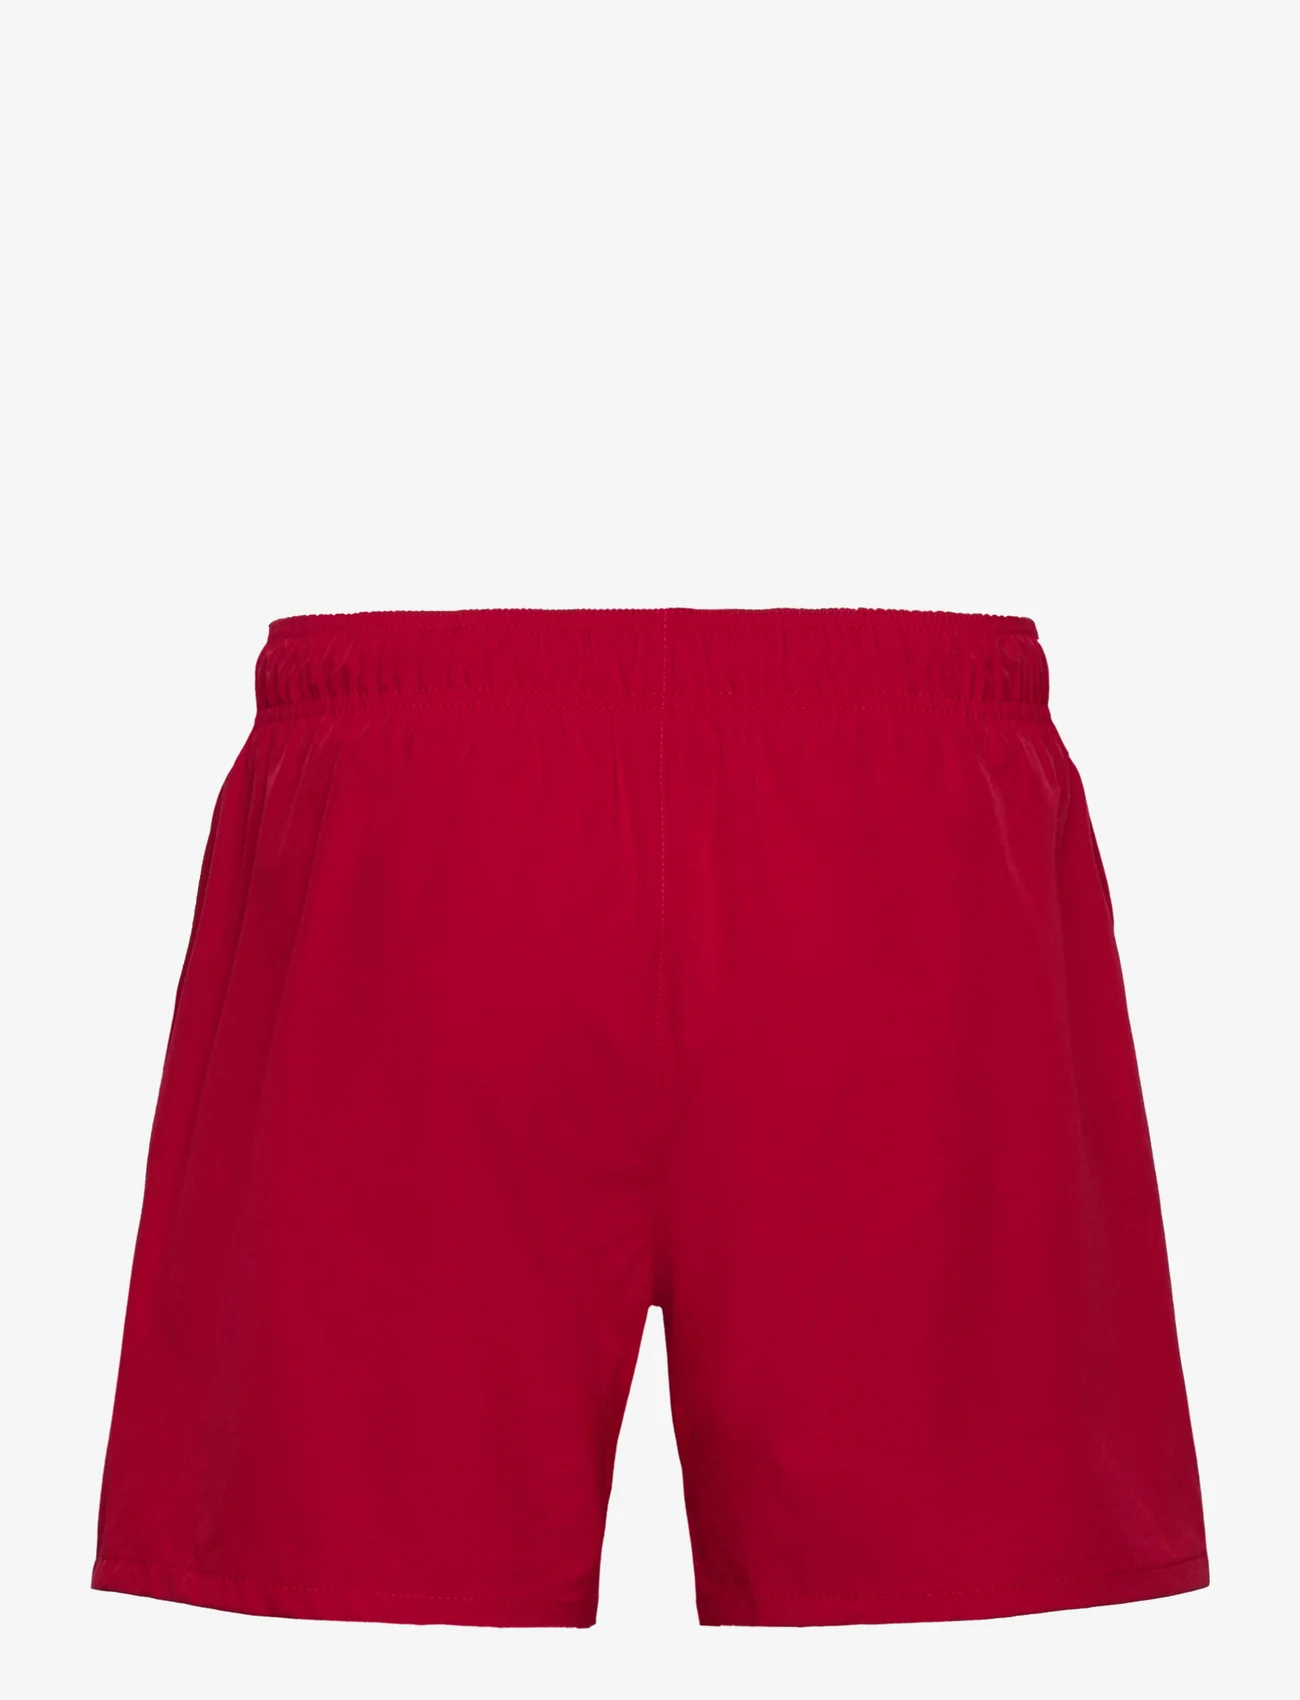 Hollister - HCo. GUYS SWIM - casual shorts - jester red - 1